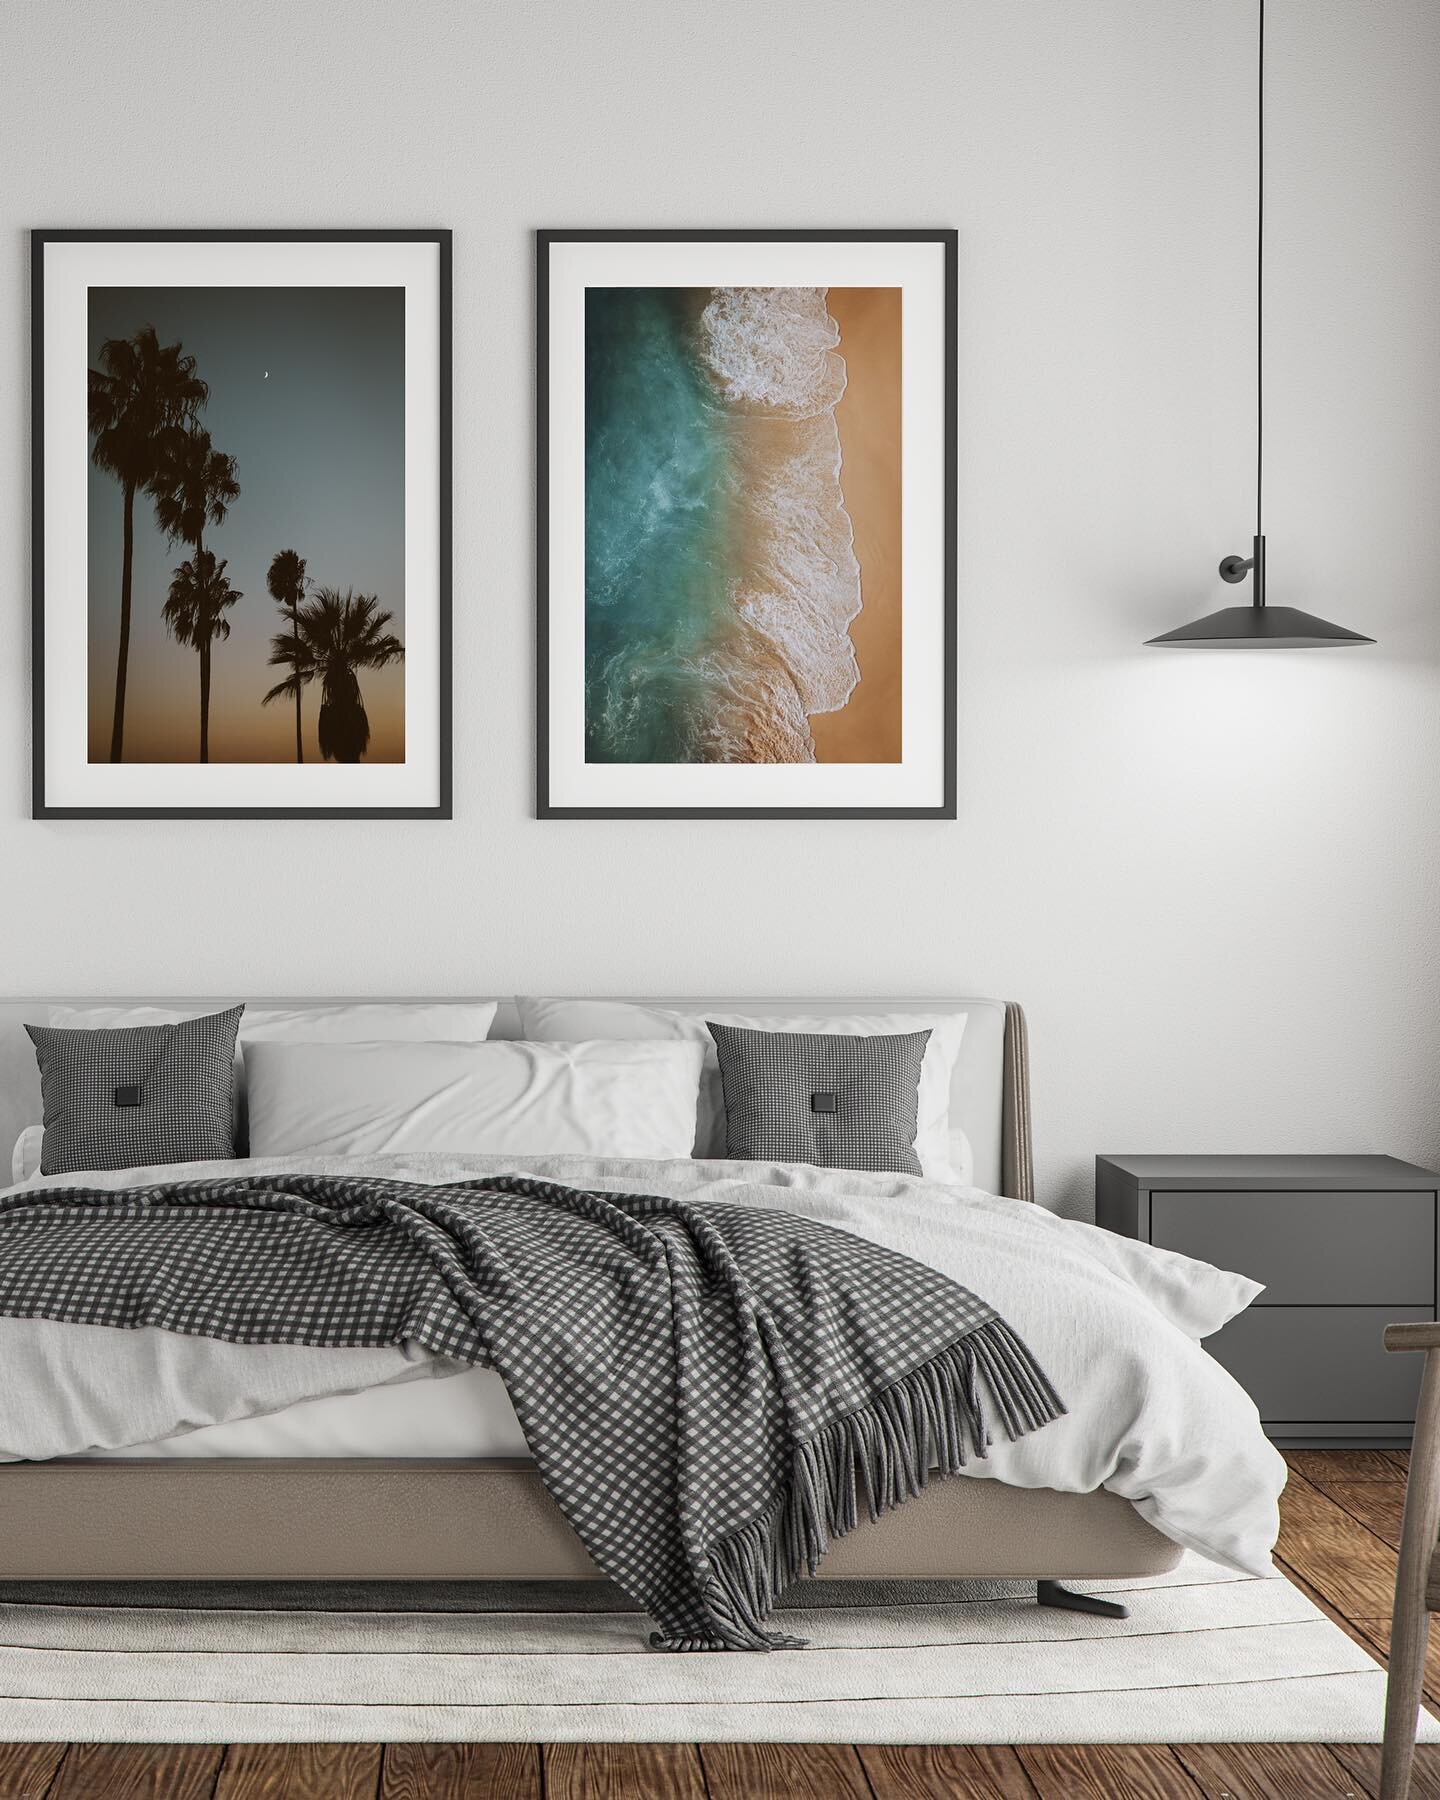 My bedroom is my sanctuary. // a place where we dream, and refill our energy. 

Different print sizes available from 21x30cm to 70xcm. Printed on a museum-quality poster made on thick and durable matte paper. A statement in any room, each poster is g